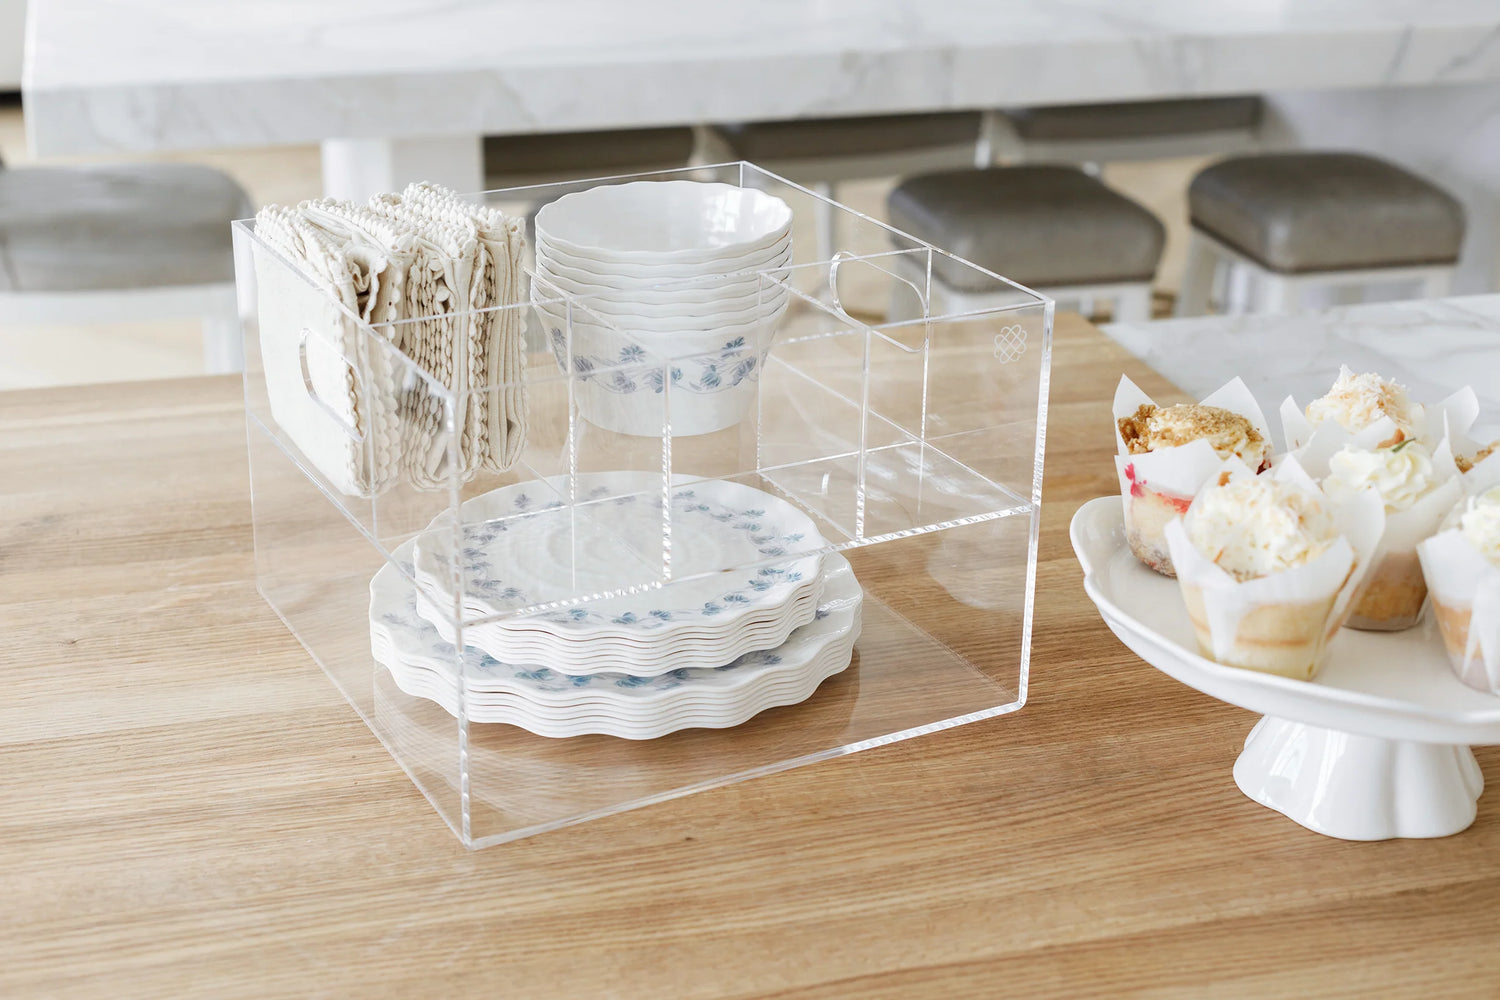 Acrylic Utensil Caddy holding dainty white and blue plates, bowls, and linen napkins. 